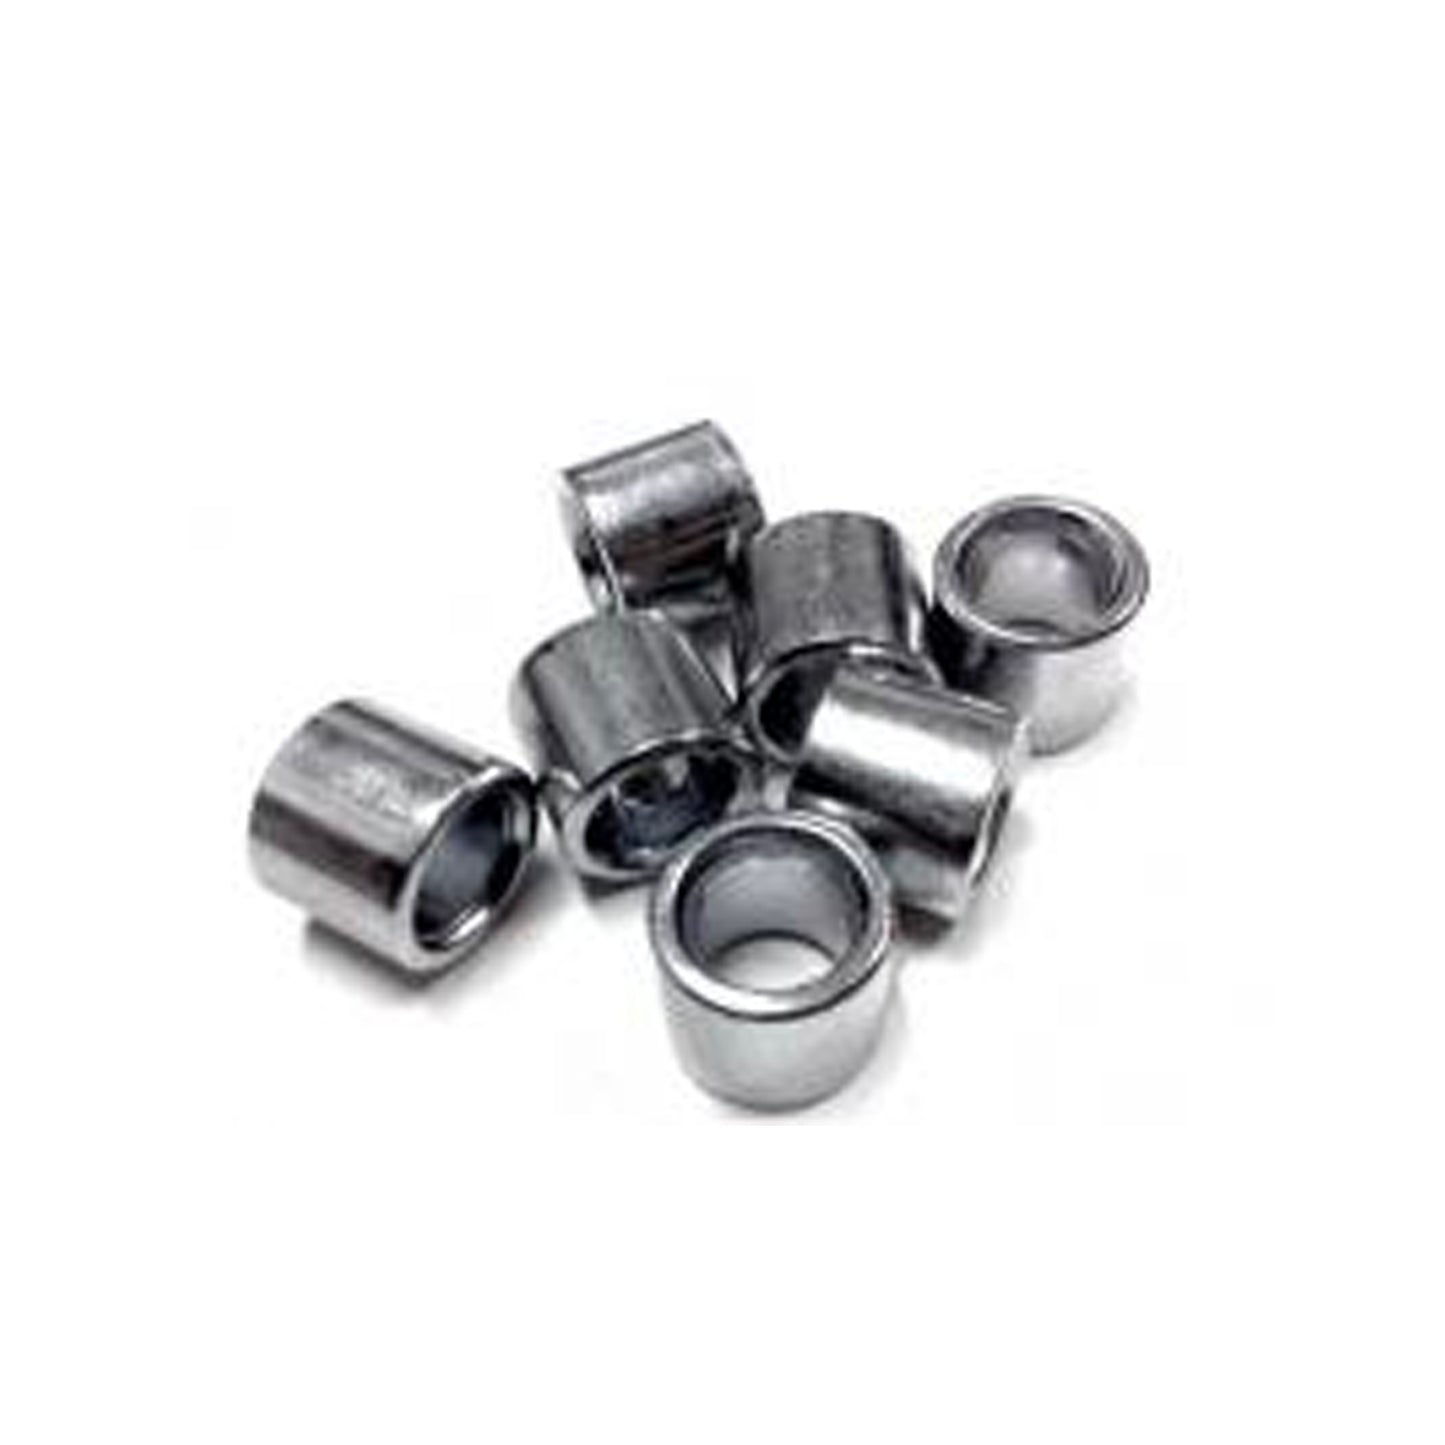 Sushi Bearing Spacers Steel Silver 10 MM(Set of 4) - Prime Delux Store